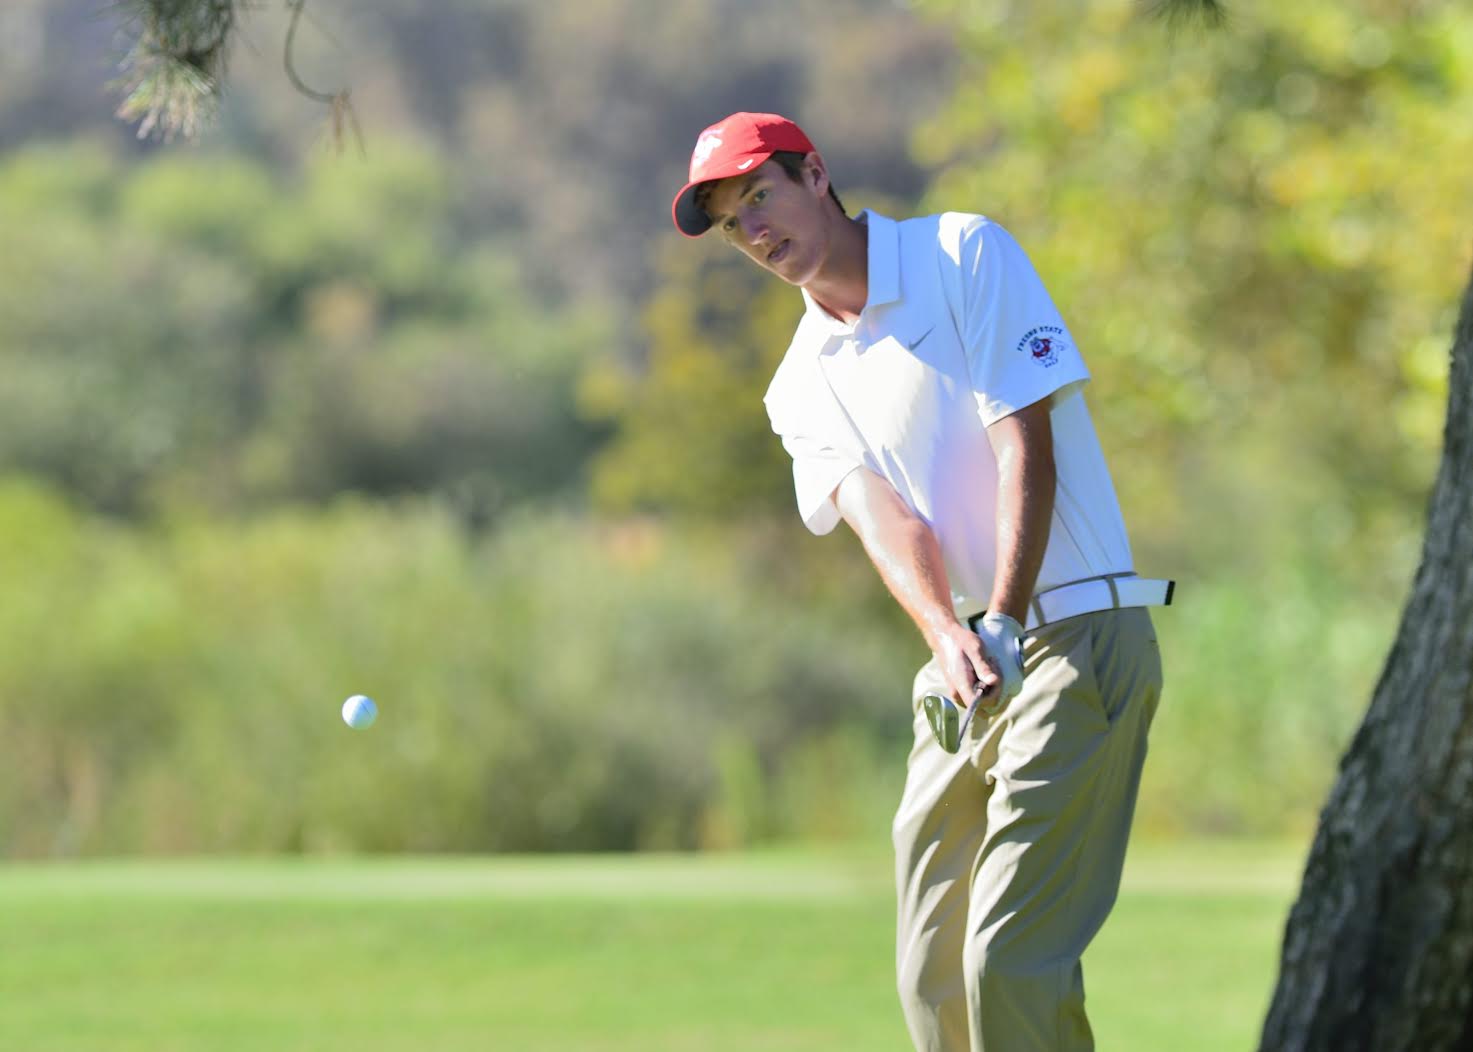 Fresno State sophomore Justin Avery finished in the Top 20 at Saint Mary’s Invitational. (Fresno State Athletics)